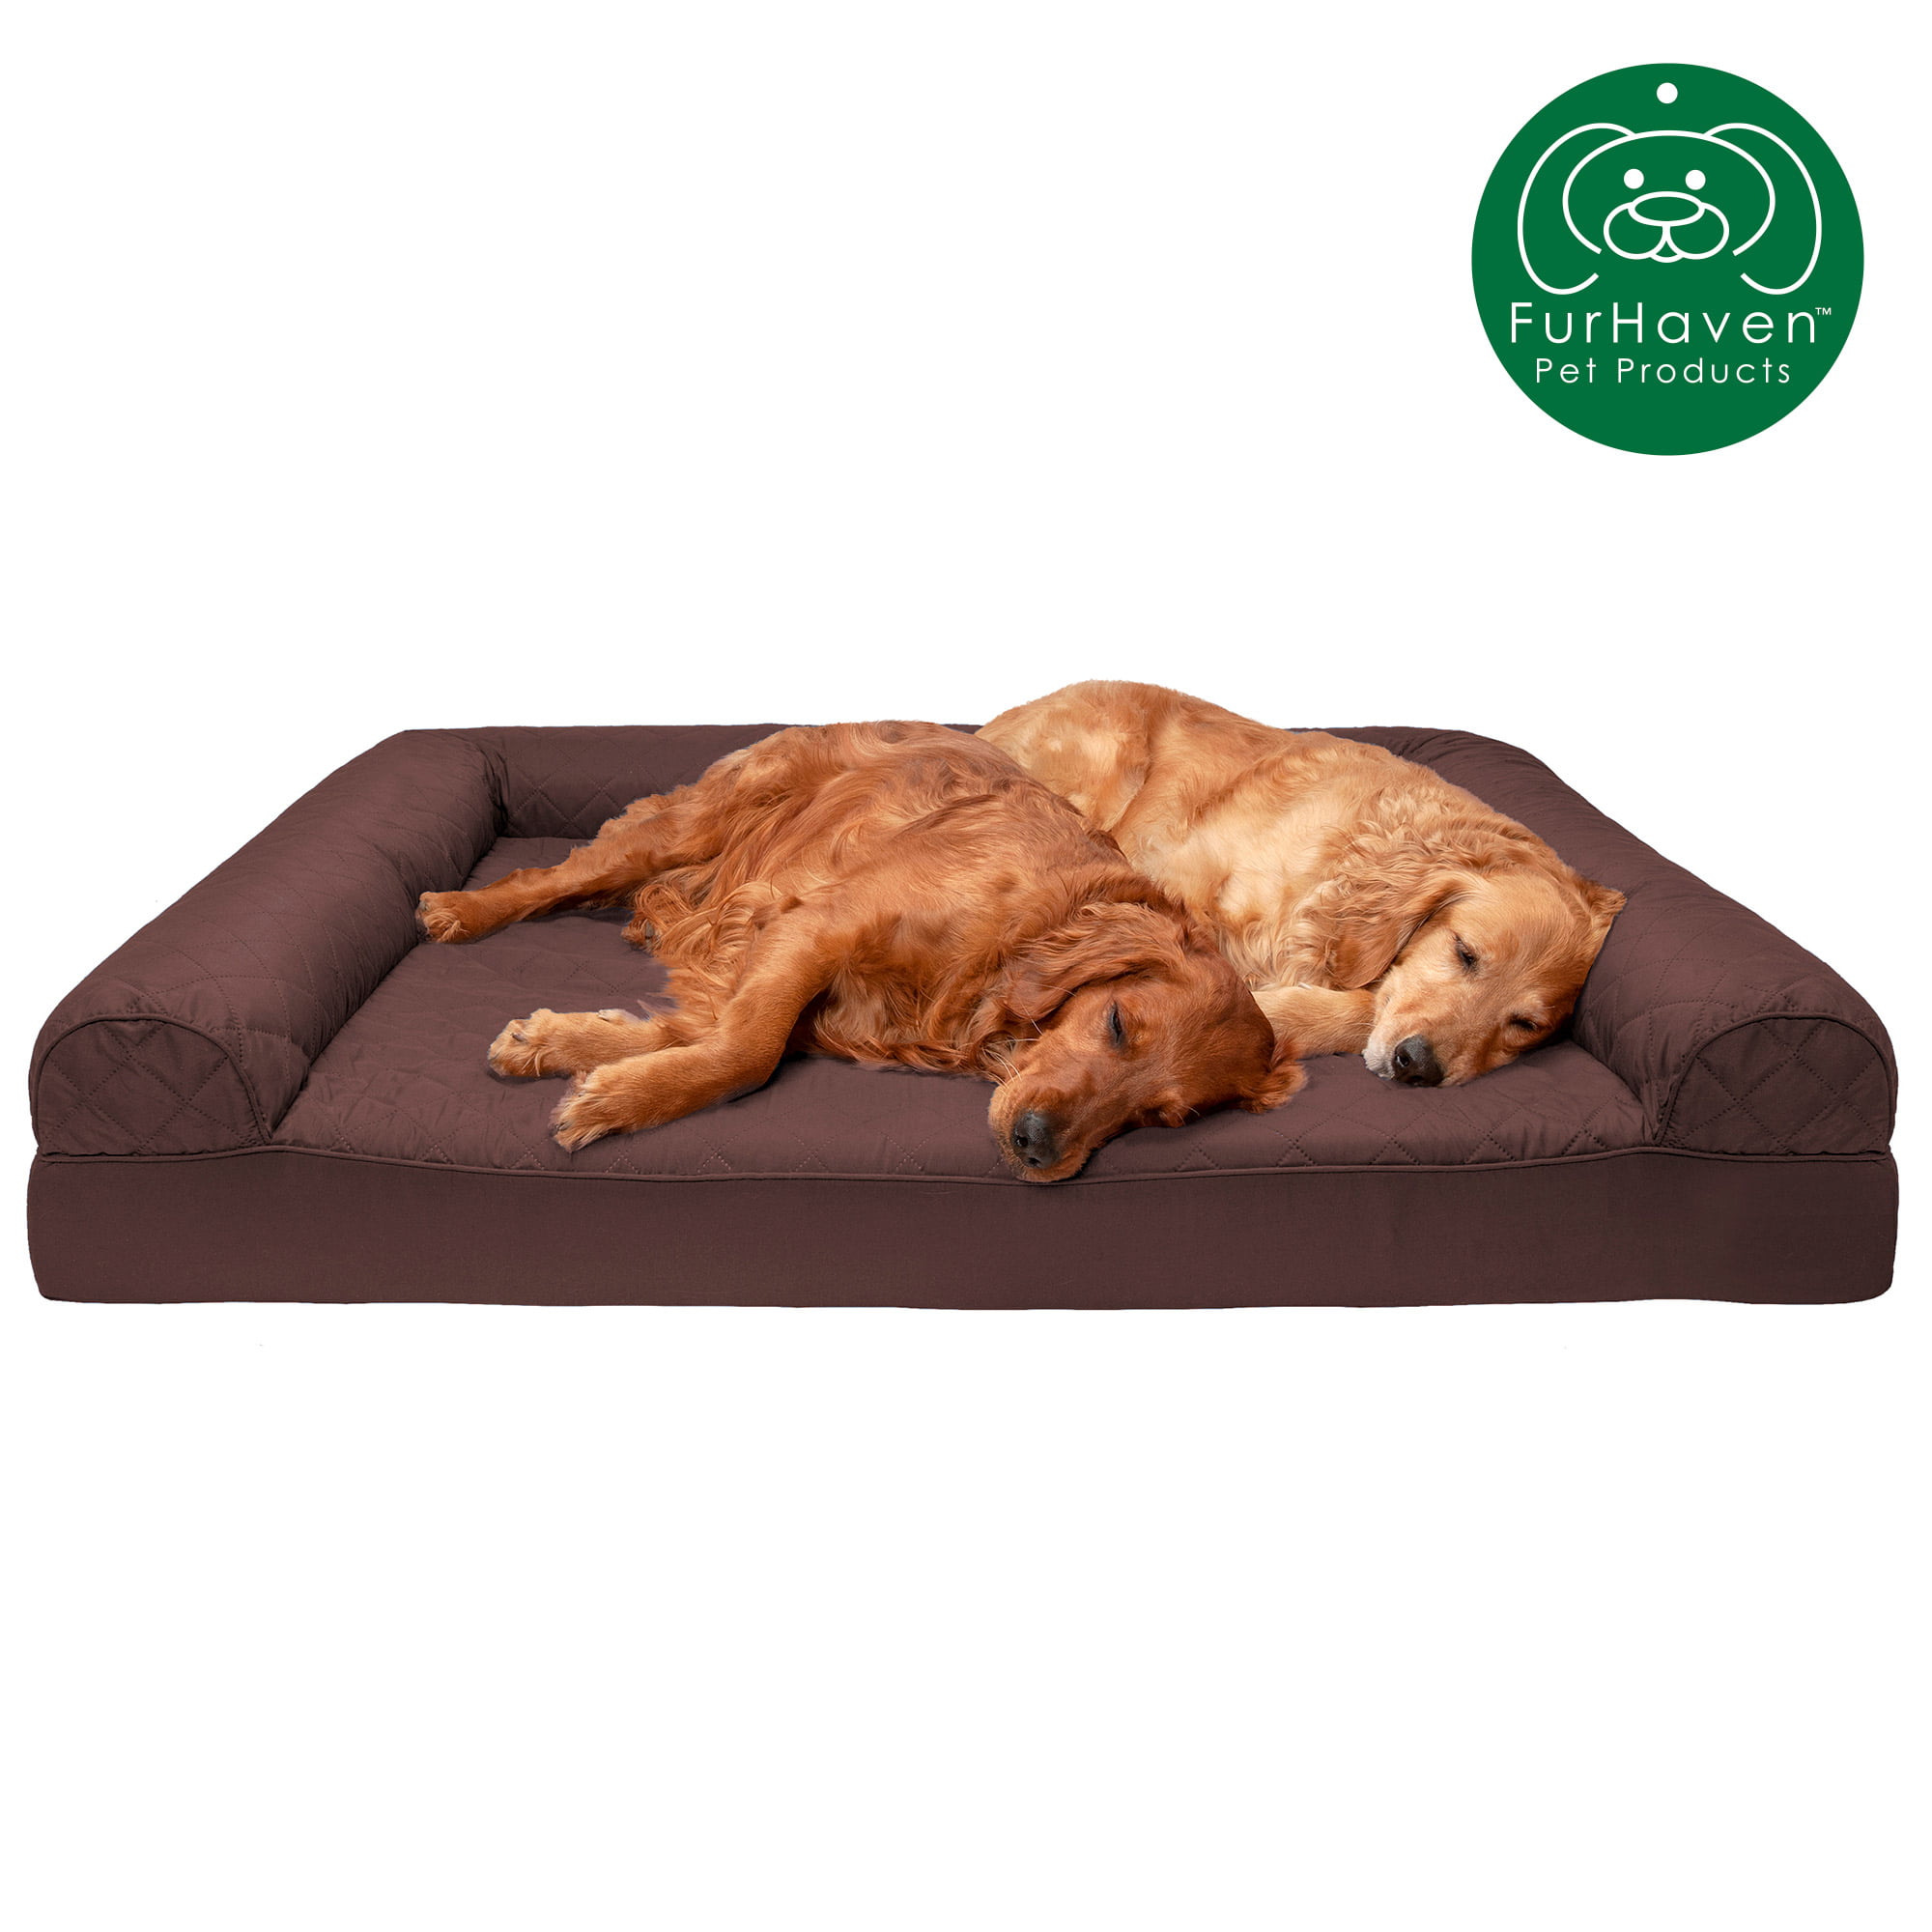 Multiple Styles Furhaven Pet and Colors Sizes Orthopedic Foam Sofa-Style Traditional Living Room Couch Dog Bed for Dogs and Cats 